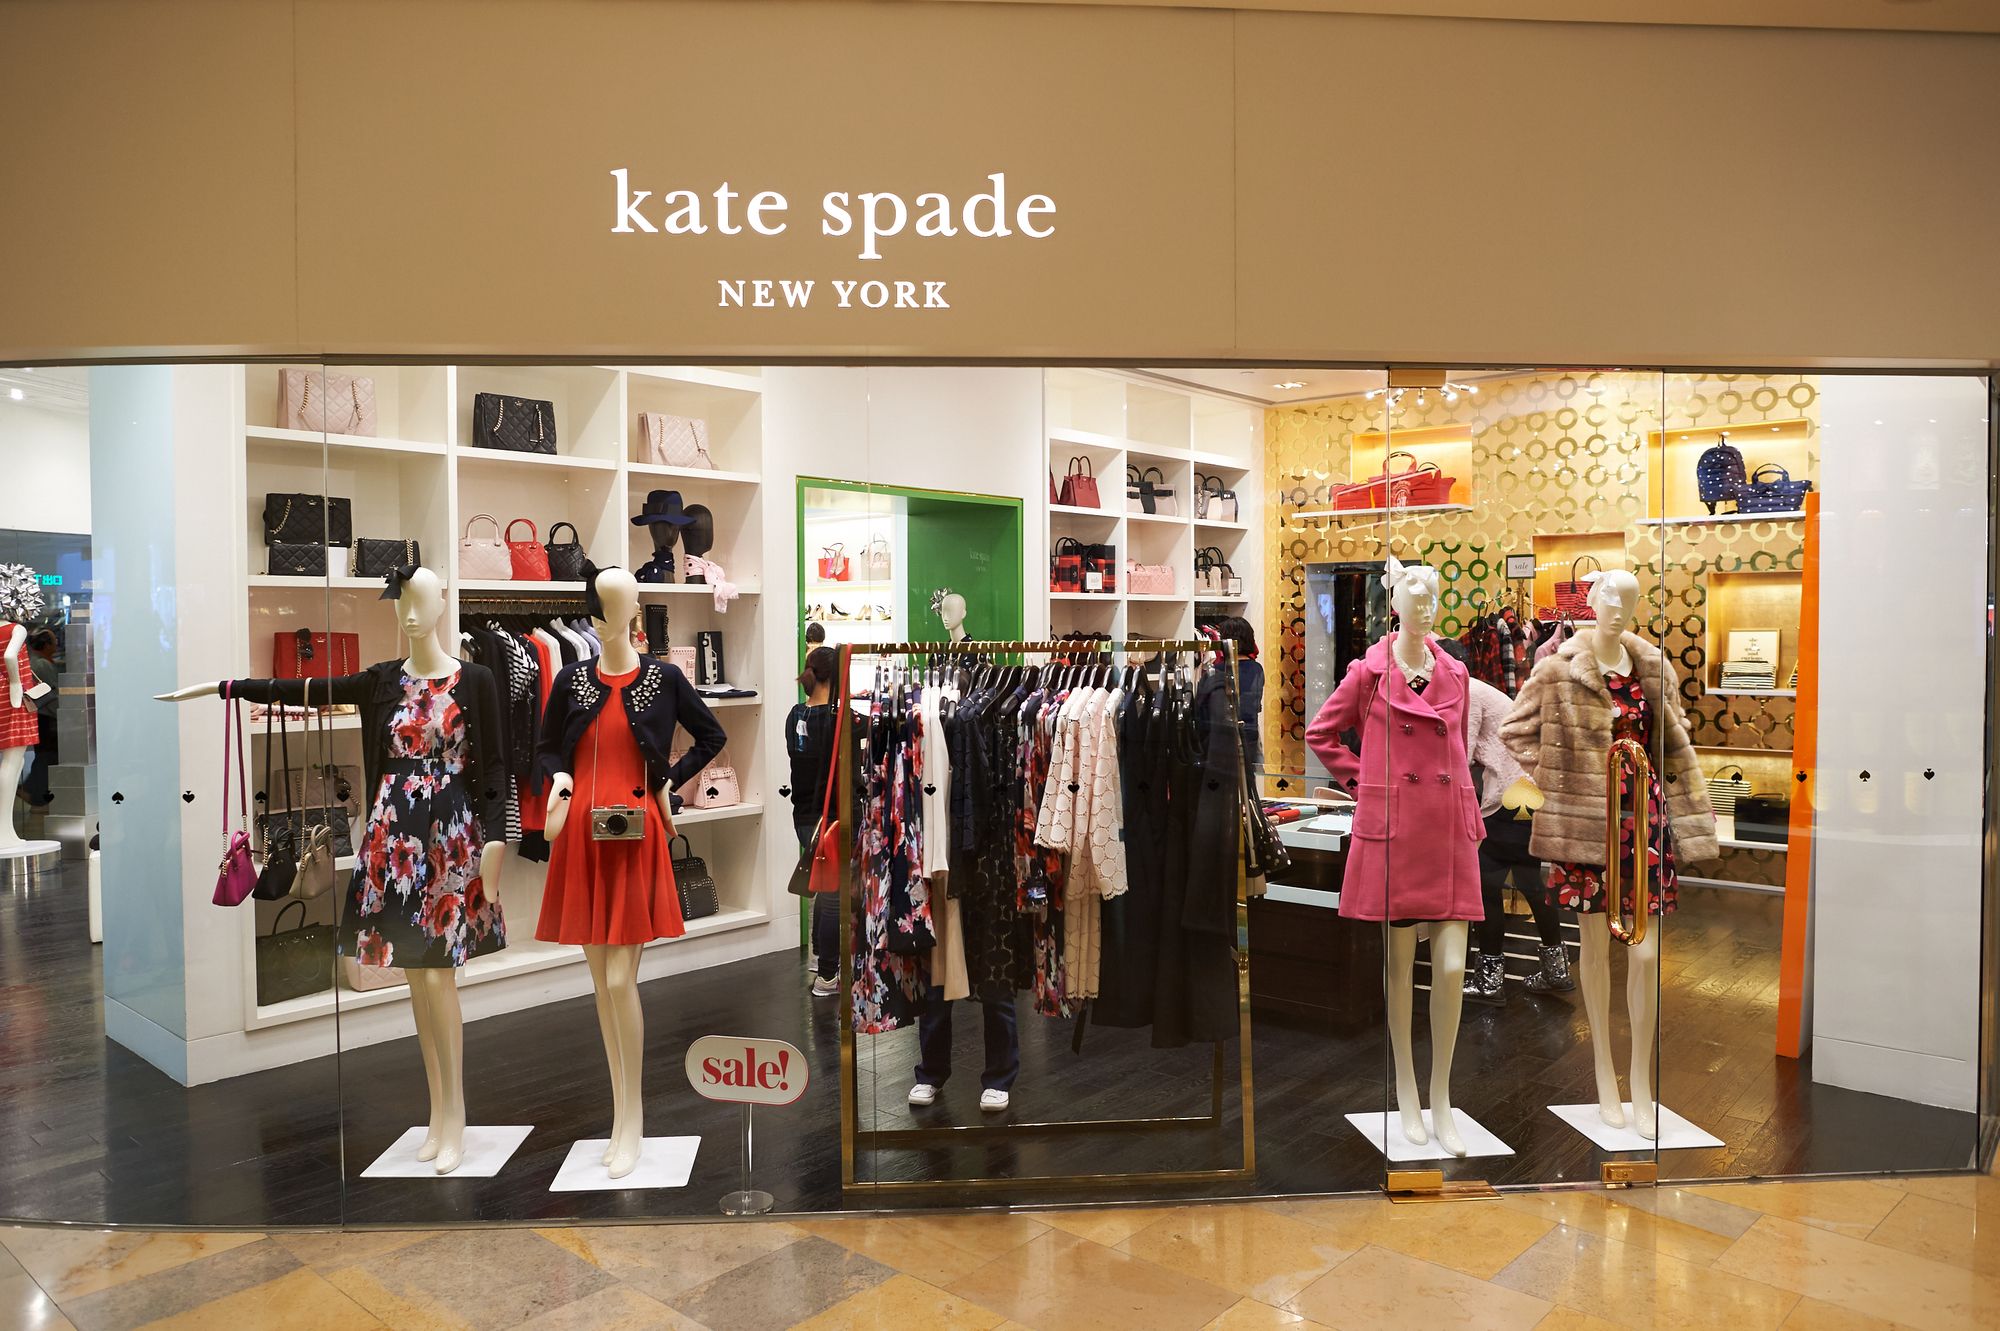 Kate Spade Sued Over Deceptive Outlet Prices - Racked